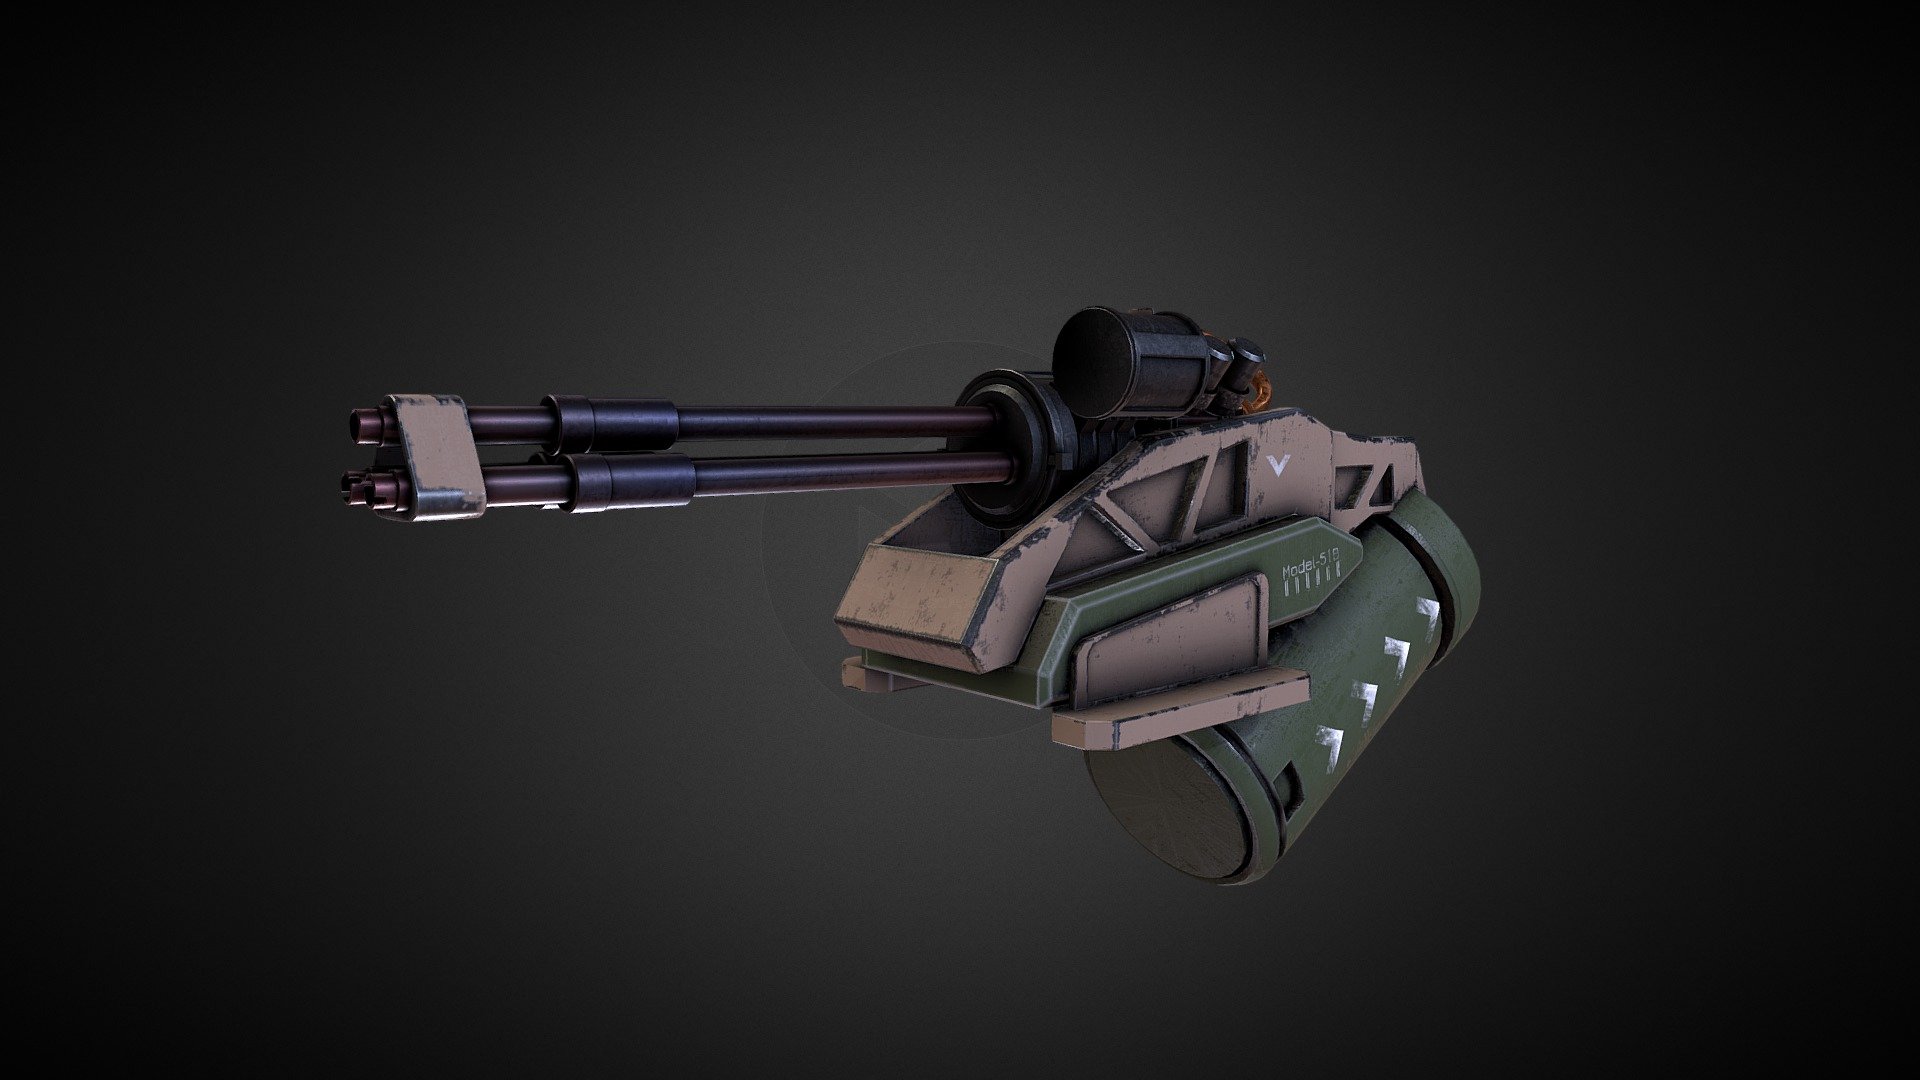 This is an older model I worked on while finishing my final term of school. I made it to exercise my hard surface modeling, as well as to practice my ability with substance painter 3d model